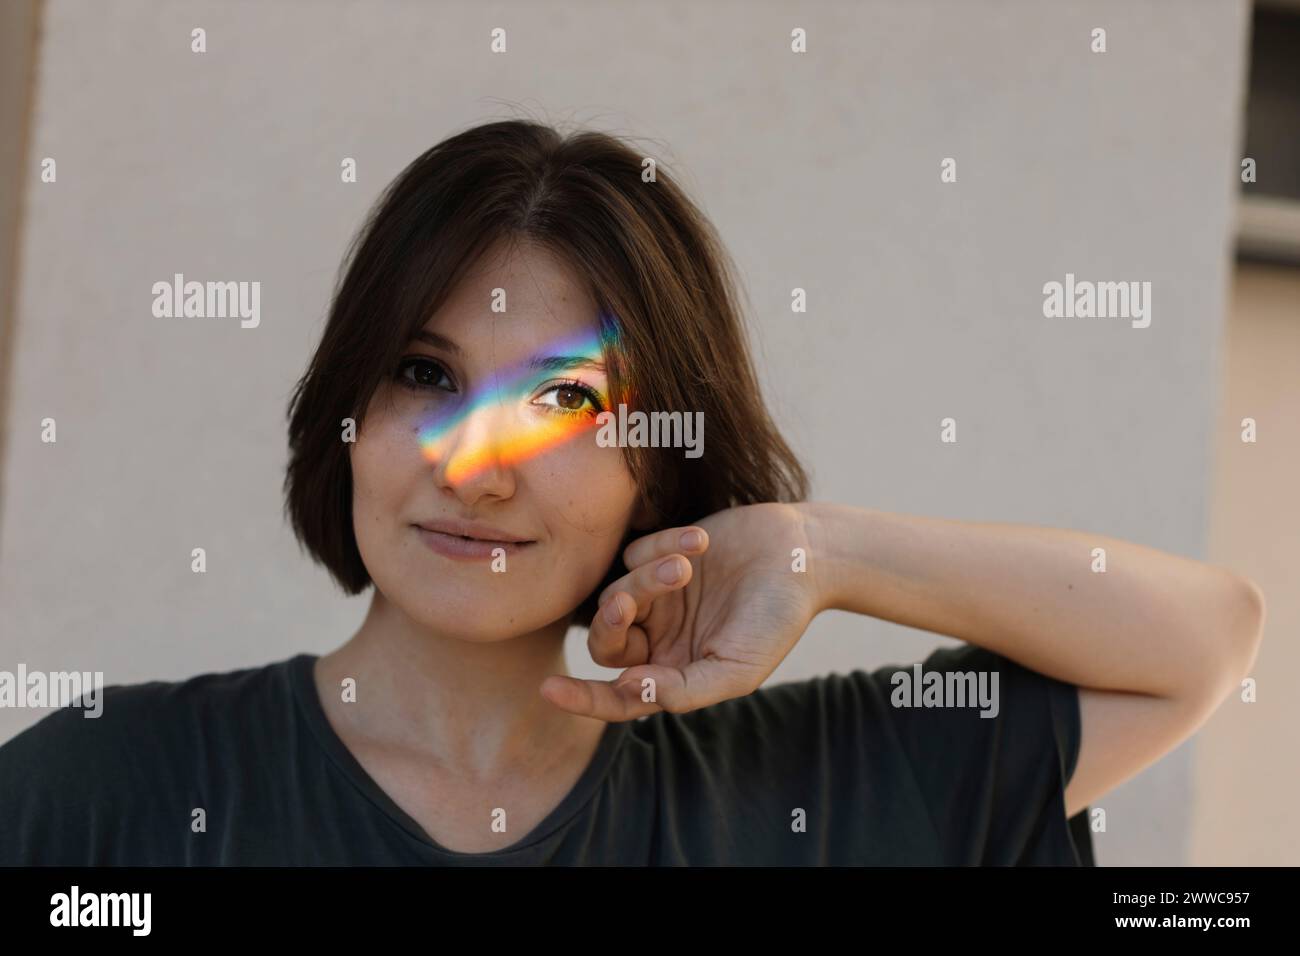 Rainbow colored light on woman's face Stock Photo